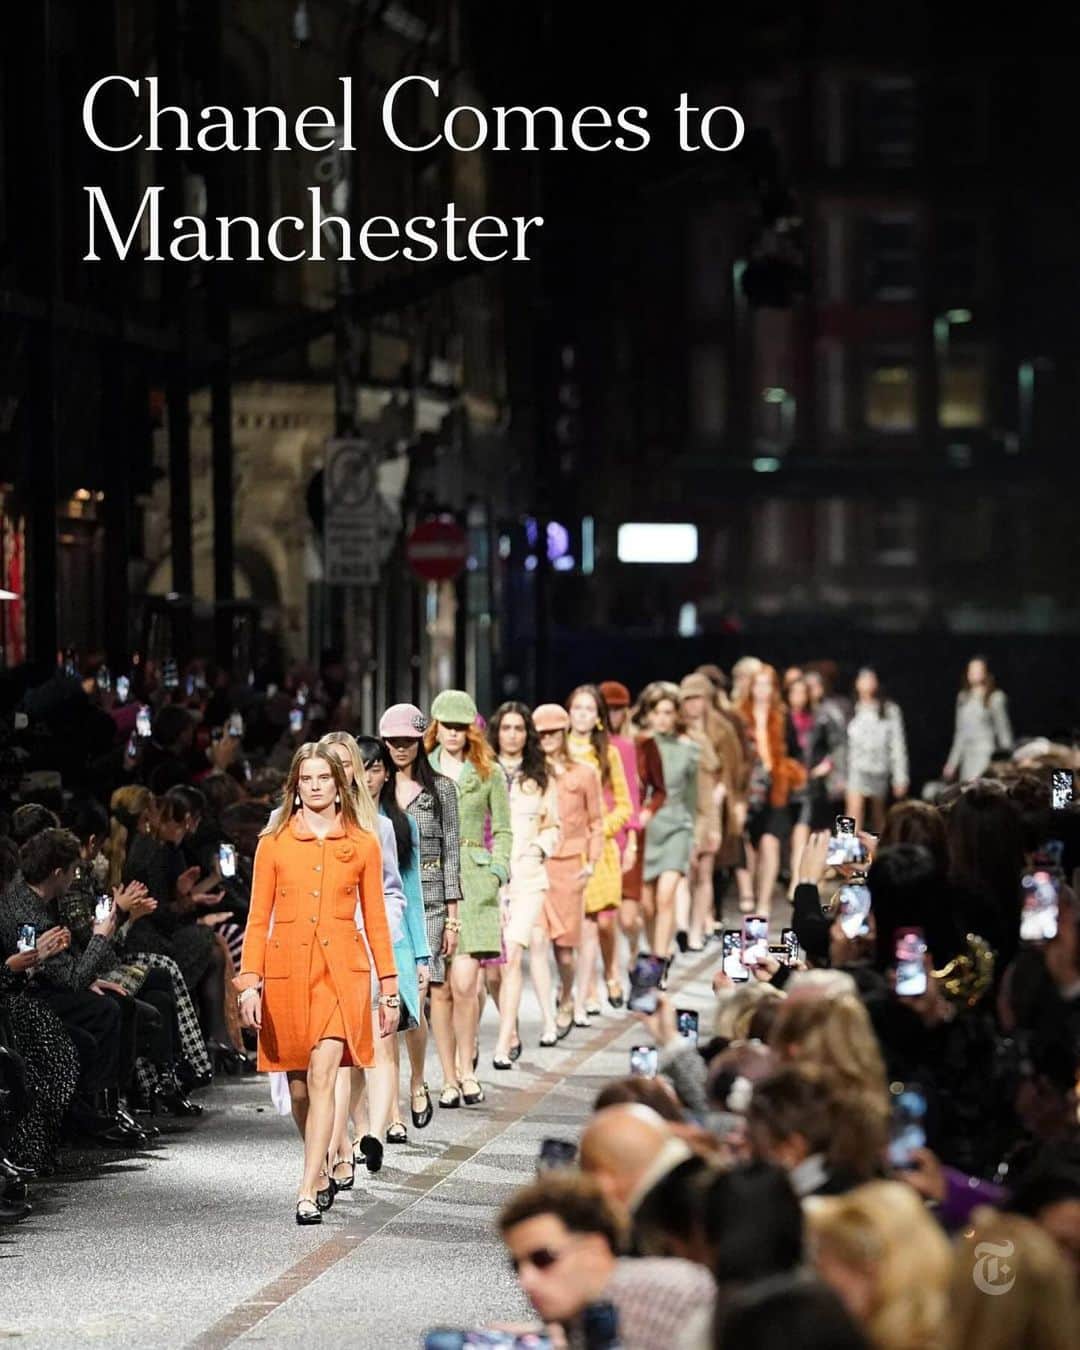 New York Times Fashionのインスタグラム：「Most people would not consider Manchester a capital of high fashion, but that all changed this week when Chanel took over the English city for its Métiers d’Art runway show, an annual presentation of the intricate craftsmanship of its specialist ateliers. On Thursday, 600 guests, braving icy winds and lashing rain, descended on the Northern Quarter neighborhood for a runway show held on Thomas Street.  The collection’s inspiration spanned from the 1960s to 1980s. Tweed was the heart of the collection, seen in smart skirt suits, paired with matching baker boy caps, Mary Janes, and soccer scarves, writes @elizabethcpaton. Other outfits paid tribute to New Wave club girls, with black denim and patent leather looks and sheer baby-doll dresses with bodices made from interlocking C’s and graphic flourishes inspired by logos from the soccer stands.   All of it was bags of fun, far more tongue-in-cheek than the usual fare from a French fashion house, and a spotlight on one of Britain’s best-loved cities.  Read a full review of the show at the link in our bio. Photos courtesy of Dominic Lipinski/Getty Images and @chanelofficial」